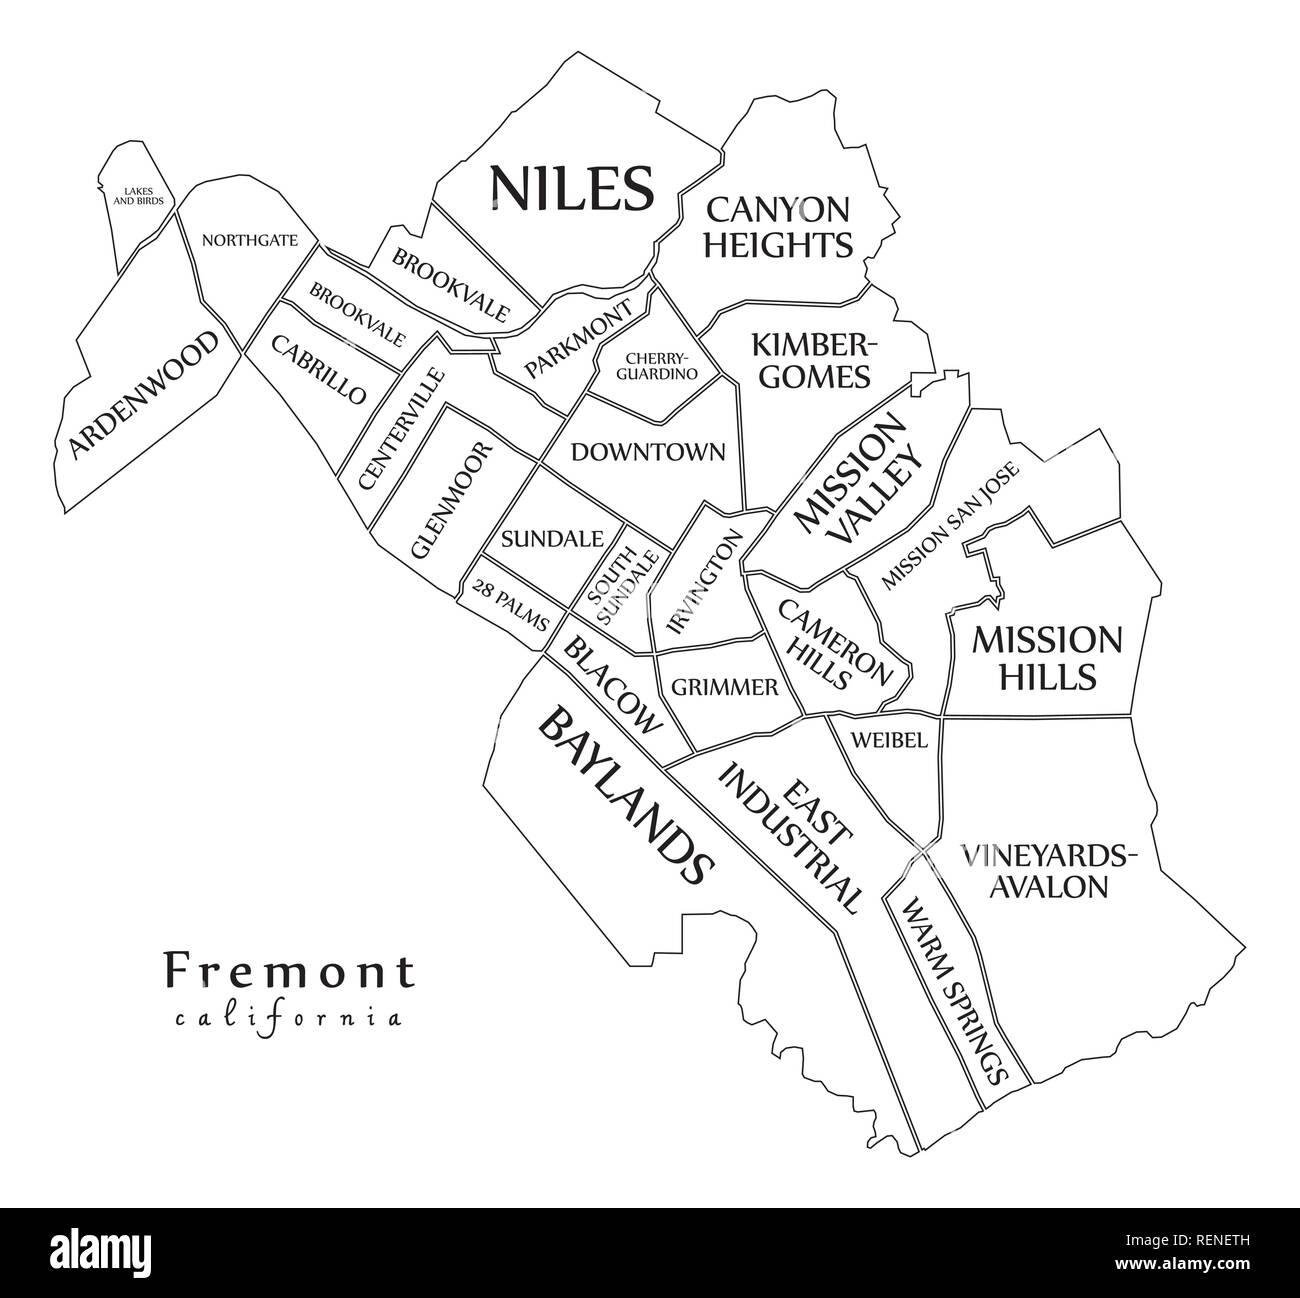 Modern City Map Fremont California City Of The Usa With Neighborhoods And Titles Outline Map RENETH 